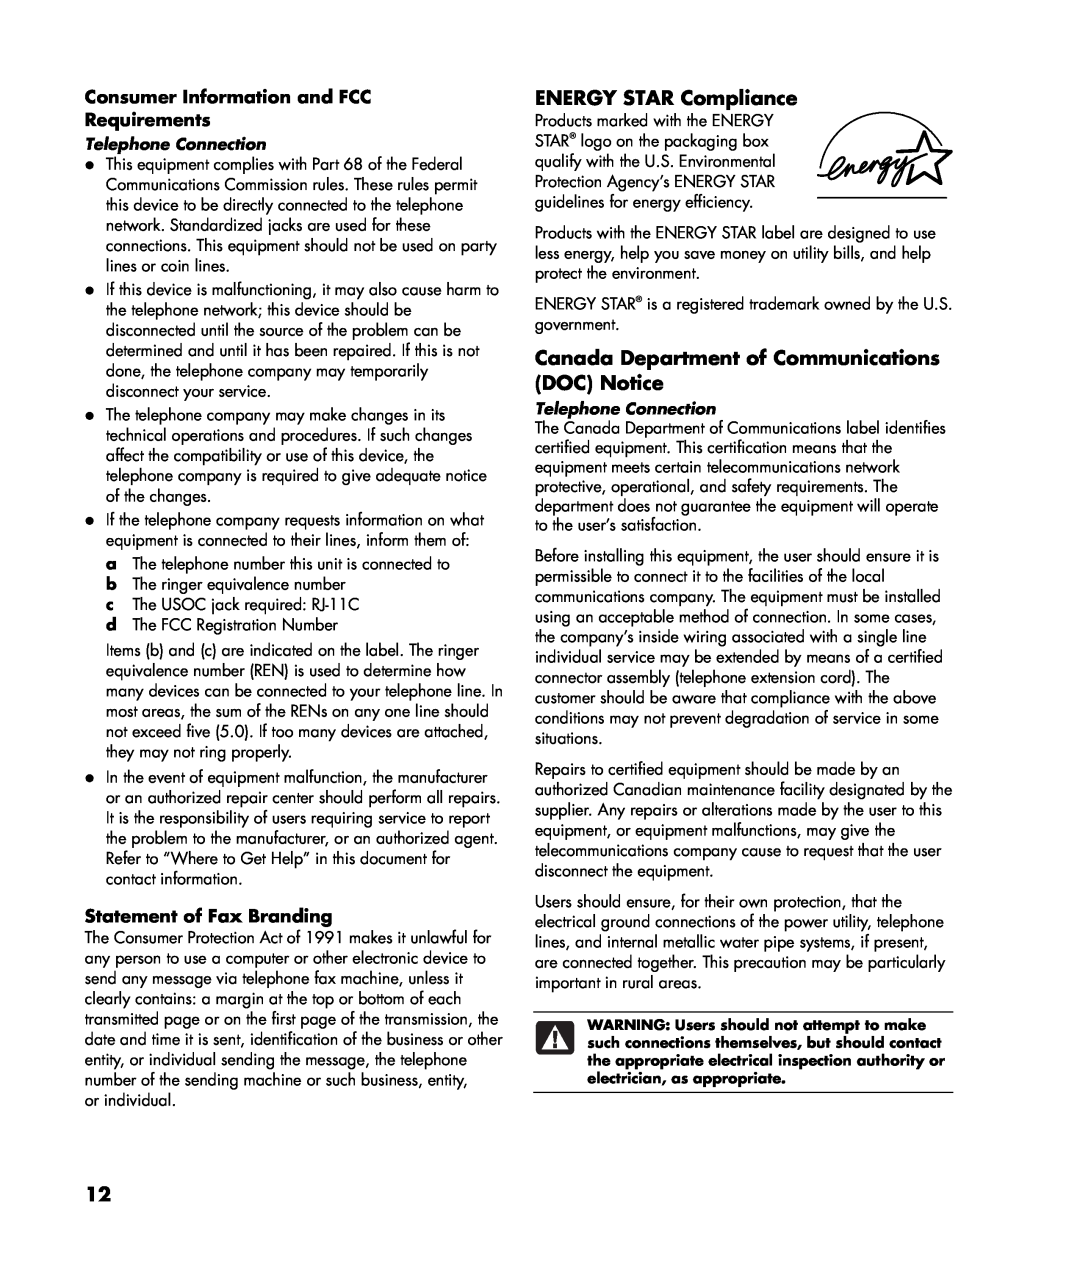 Compaq MIL-L100S warranty ENERGY STAR Compliance, Canada Department of Communications DOC Notice, Statement of Fax Branding 